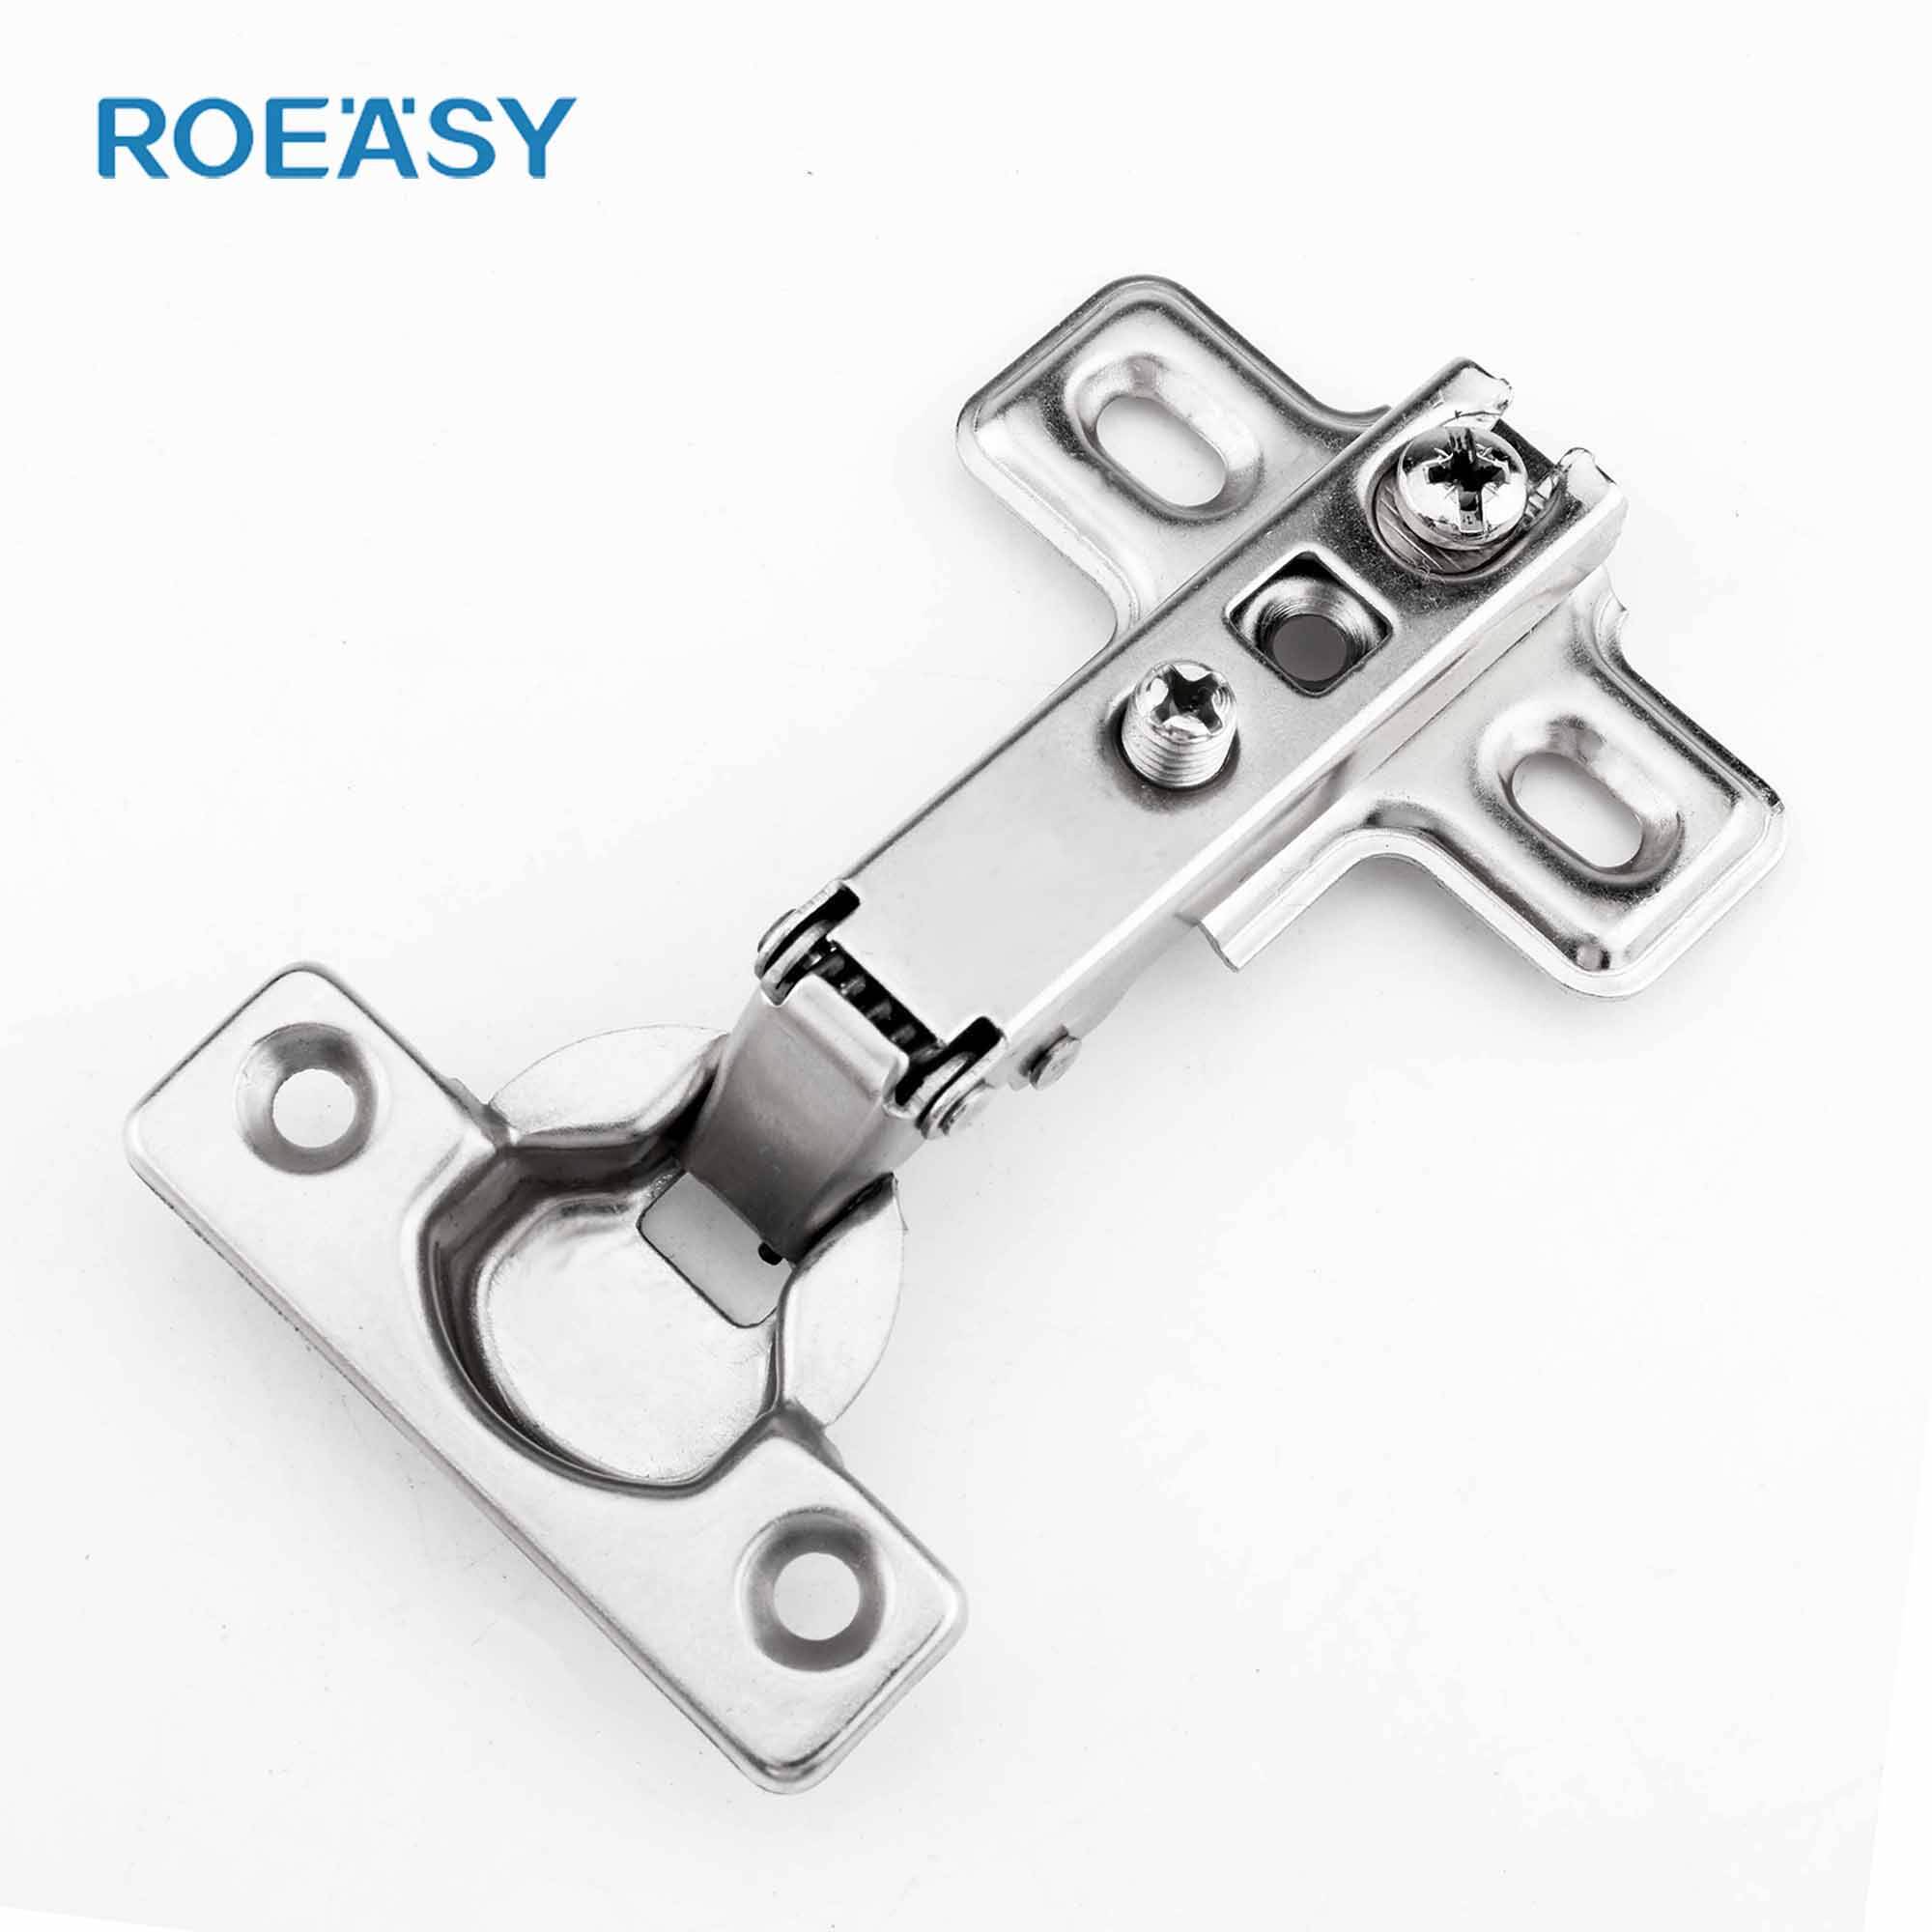 Roeasy CH-151 26mm Cup 95 degree one way mini hinge slide-on cabinet hinge